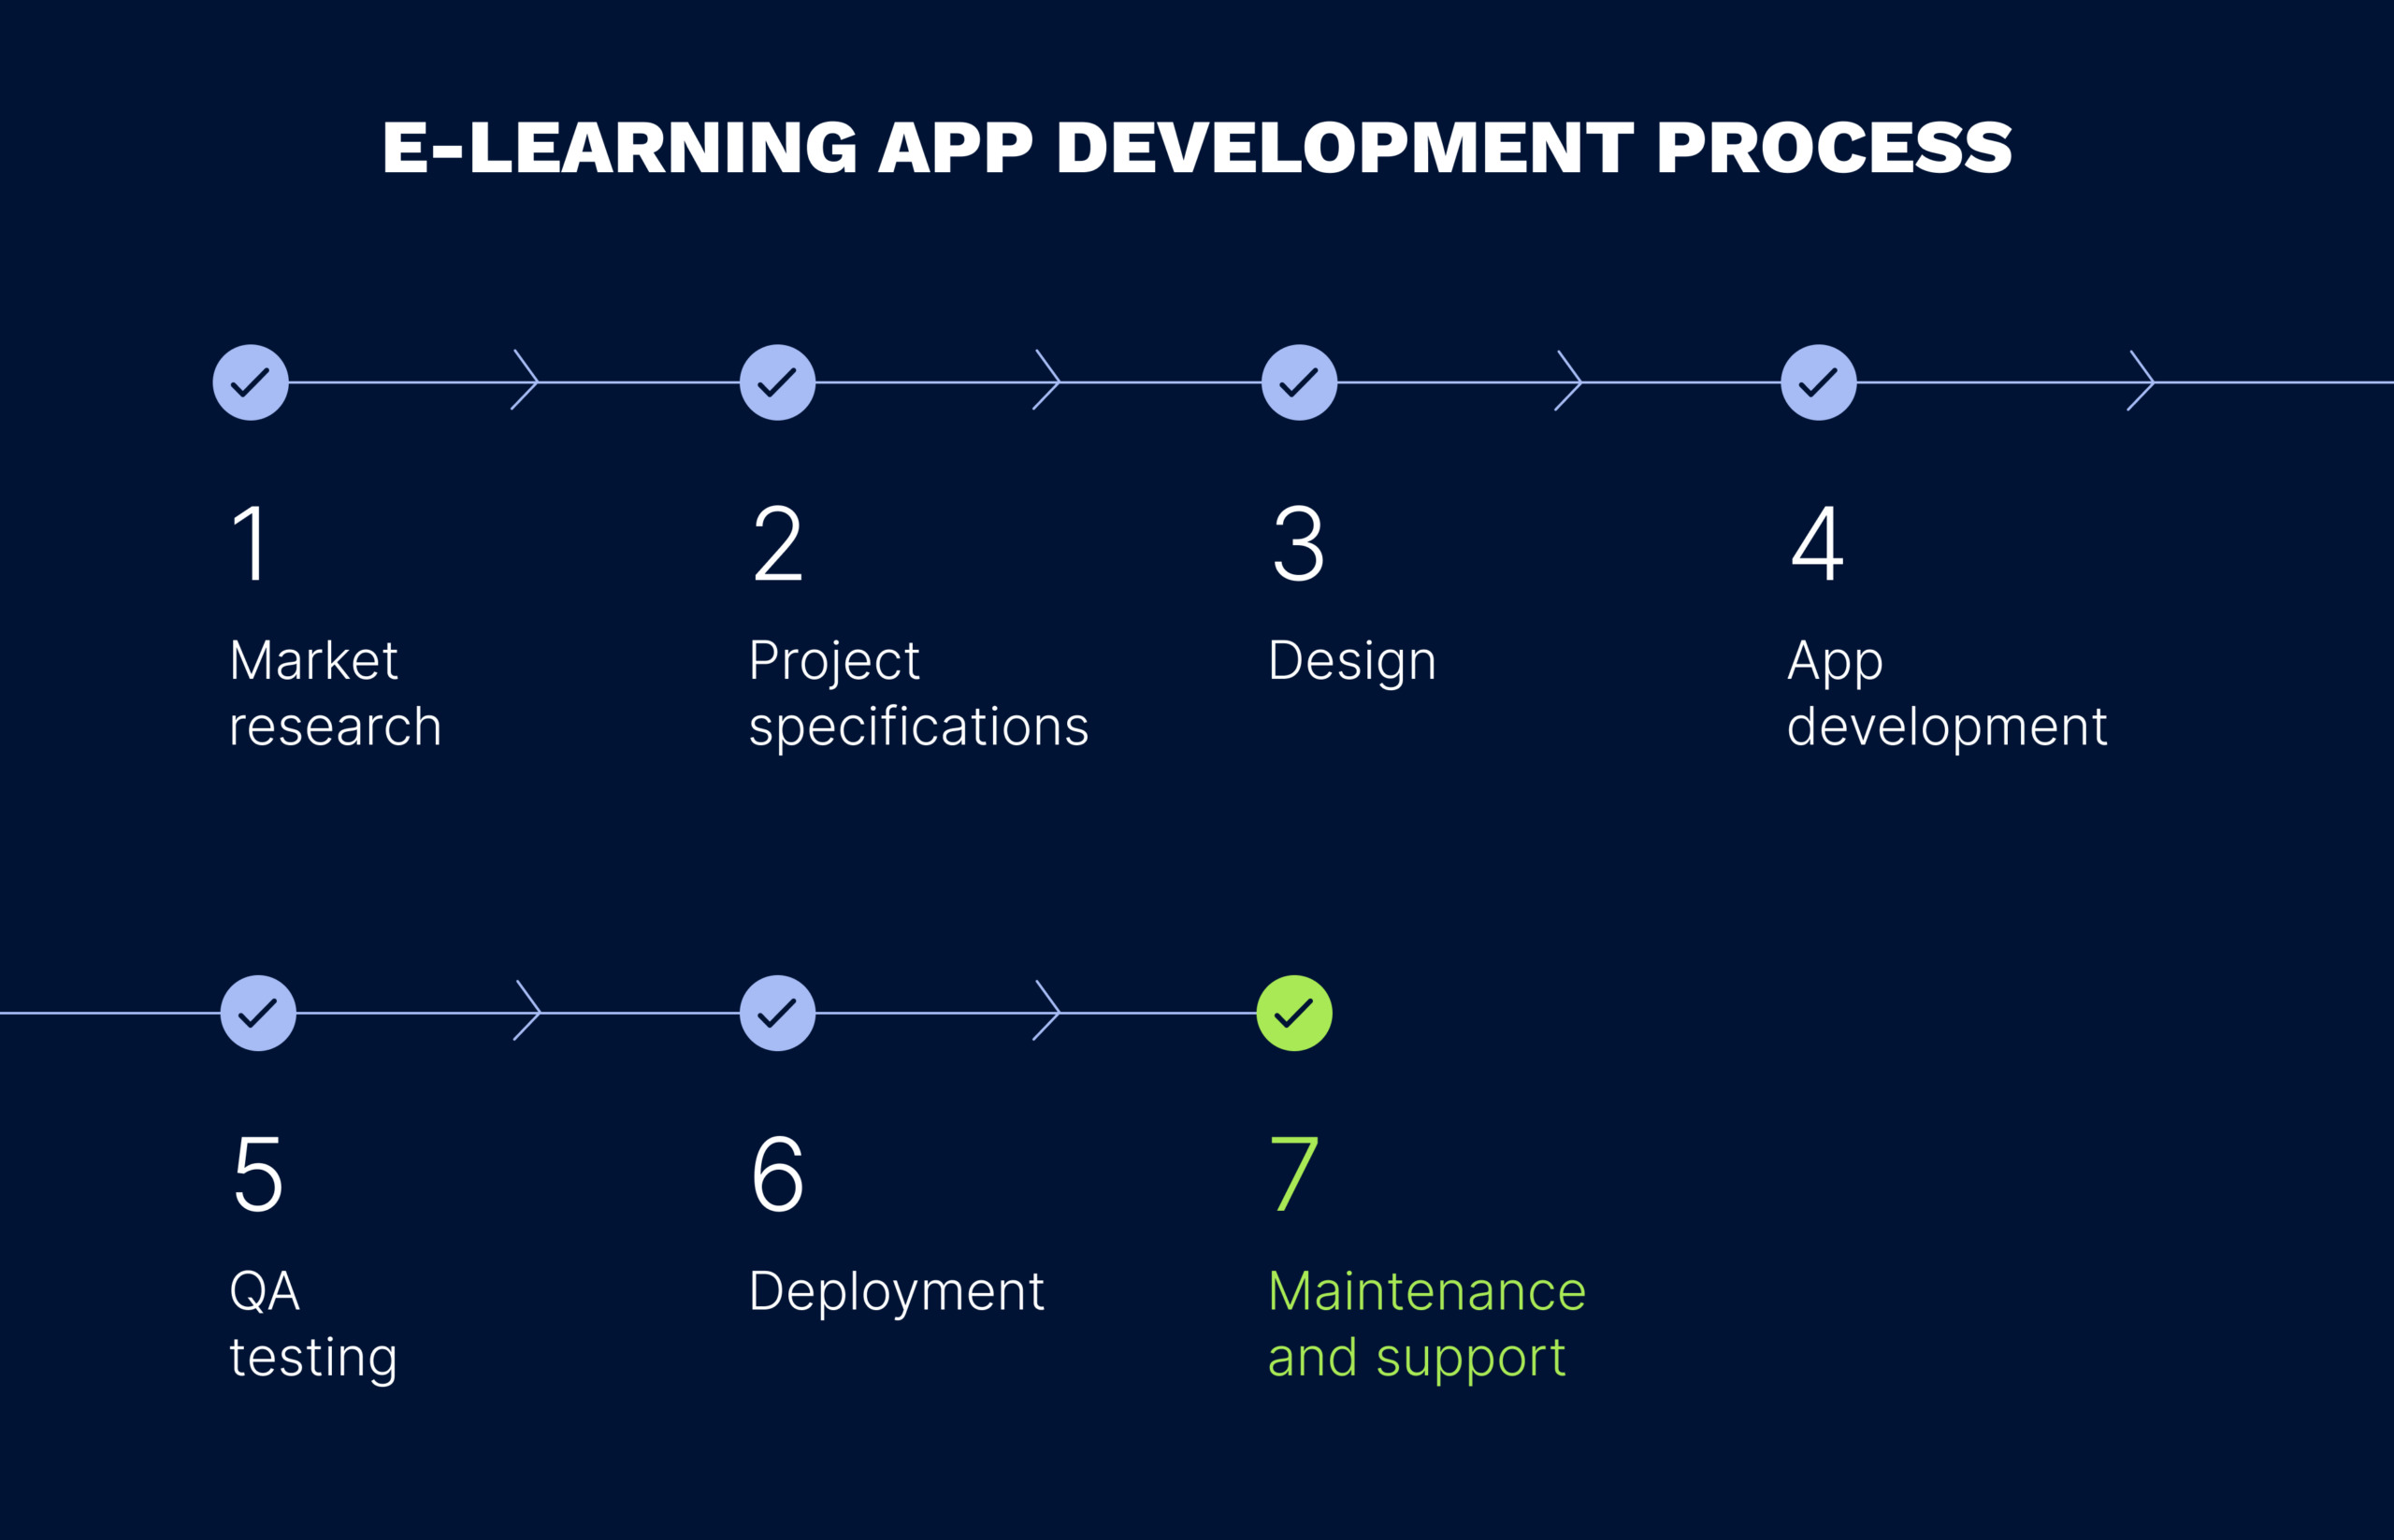 Development stages in the eLearning application development process